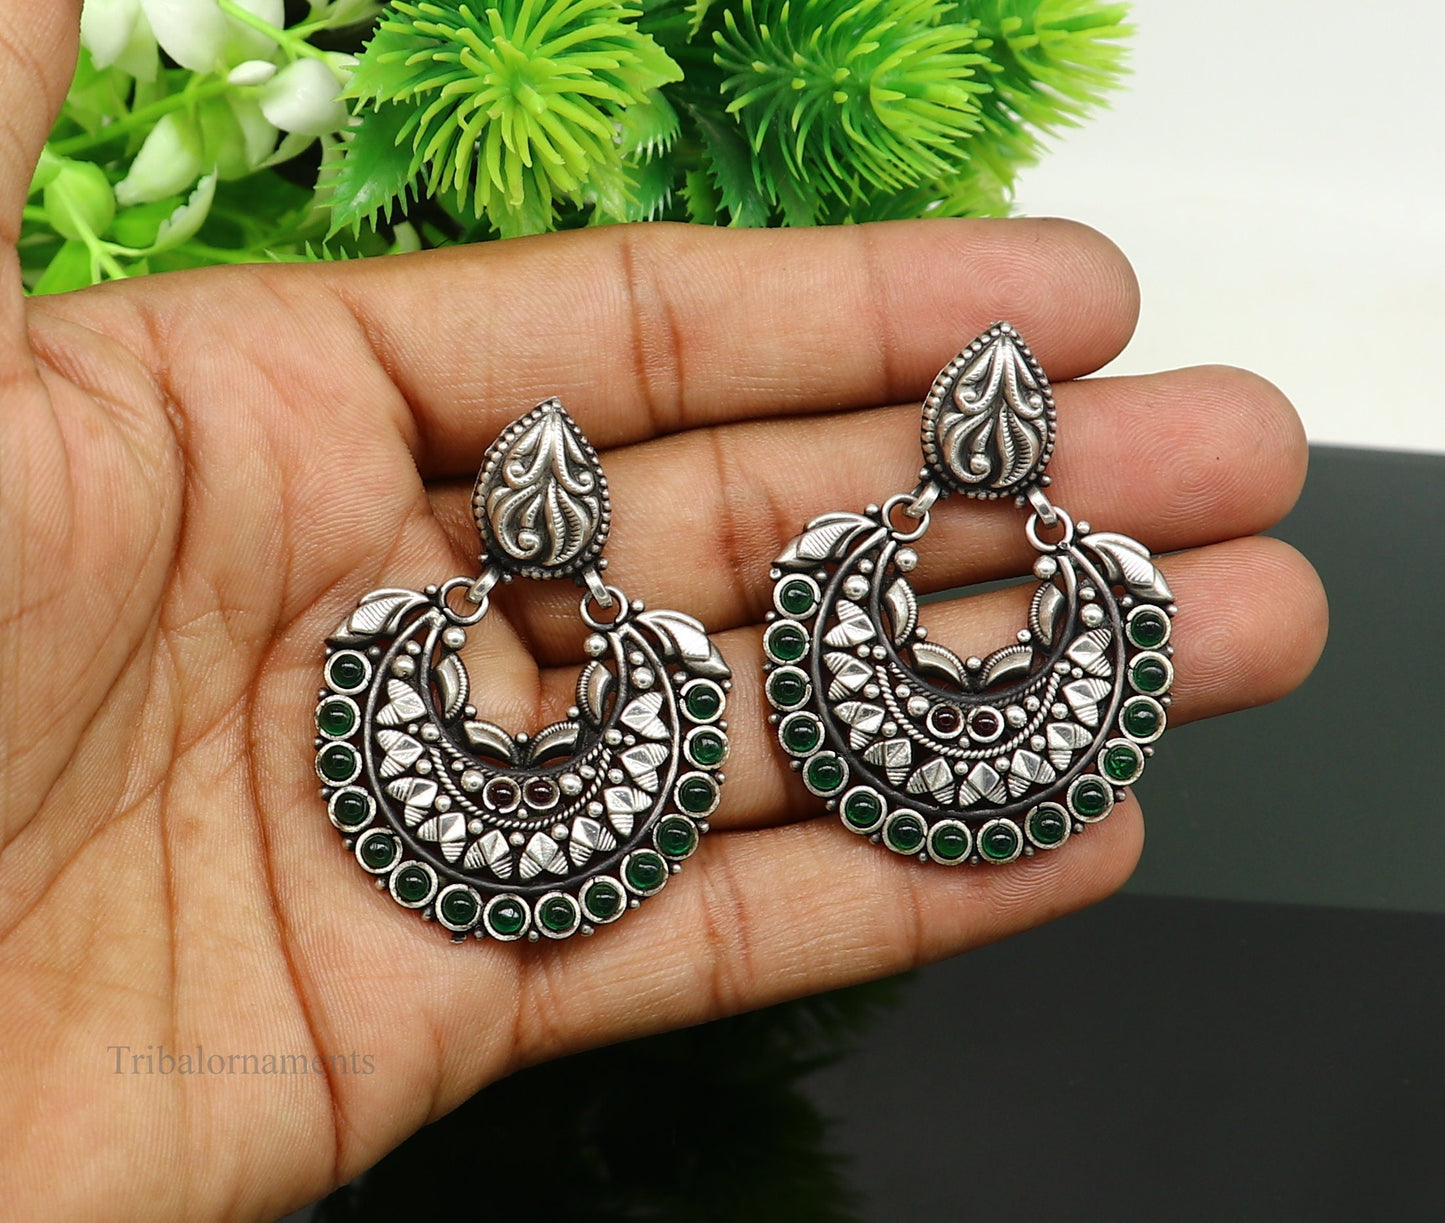 925 silver Handmade Vintage design trendy stylish stud drop dangler earring with gorgeous color stone Tribal wedding brides earrings s924 - TRIBAL ORNAMENTS